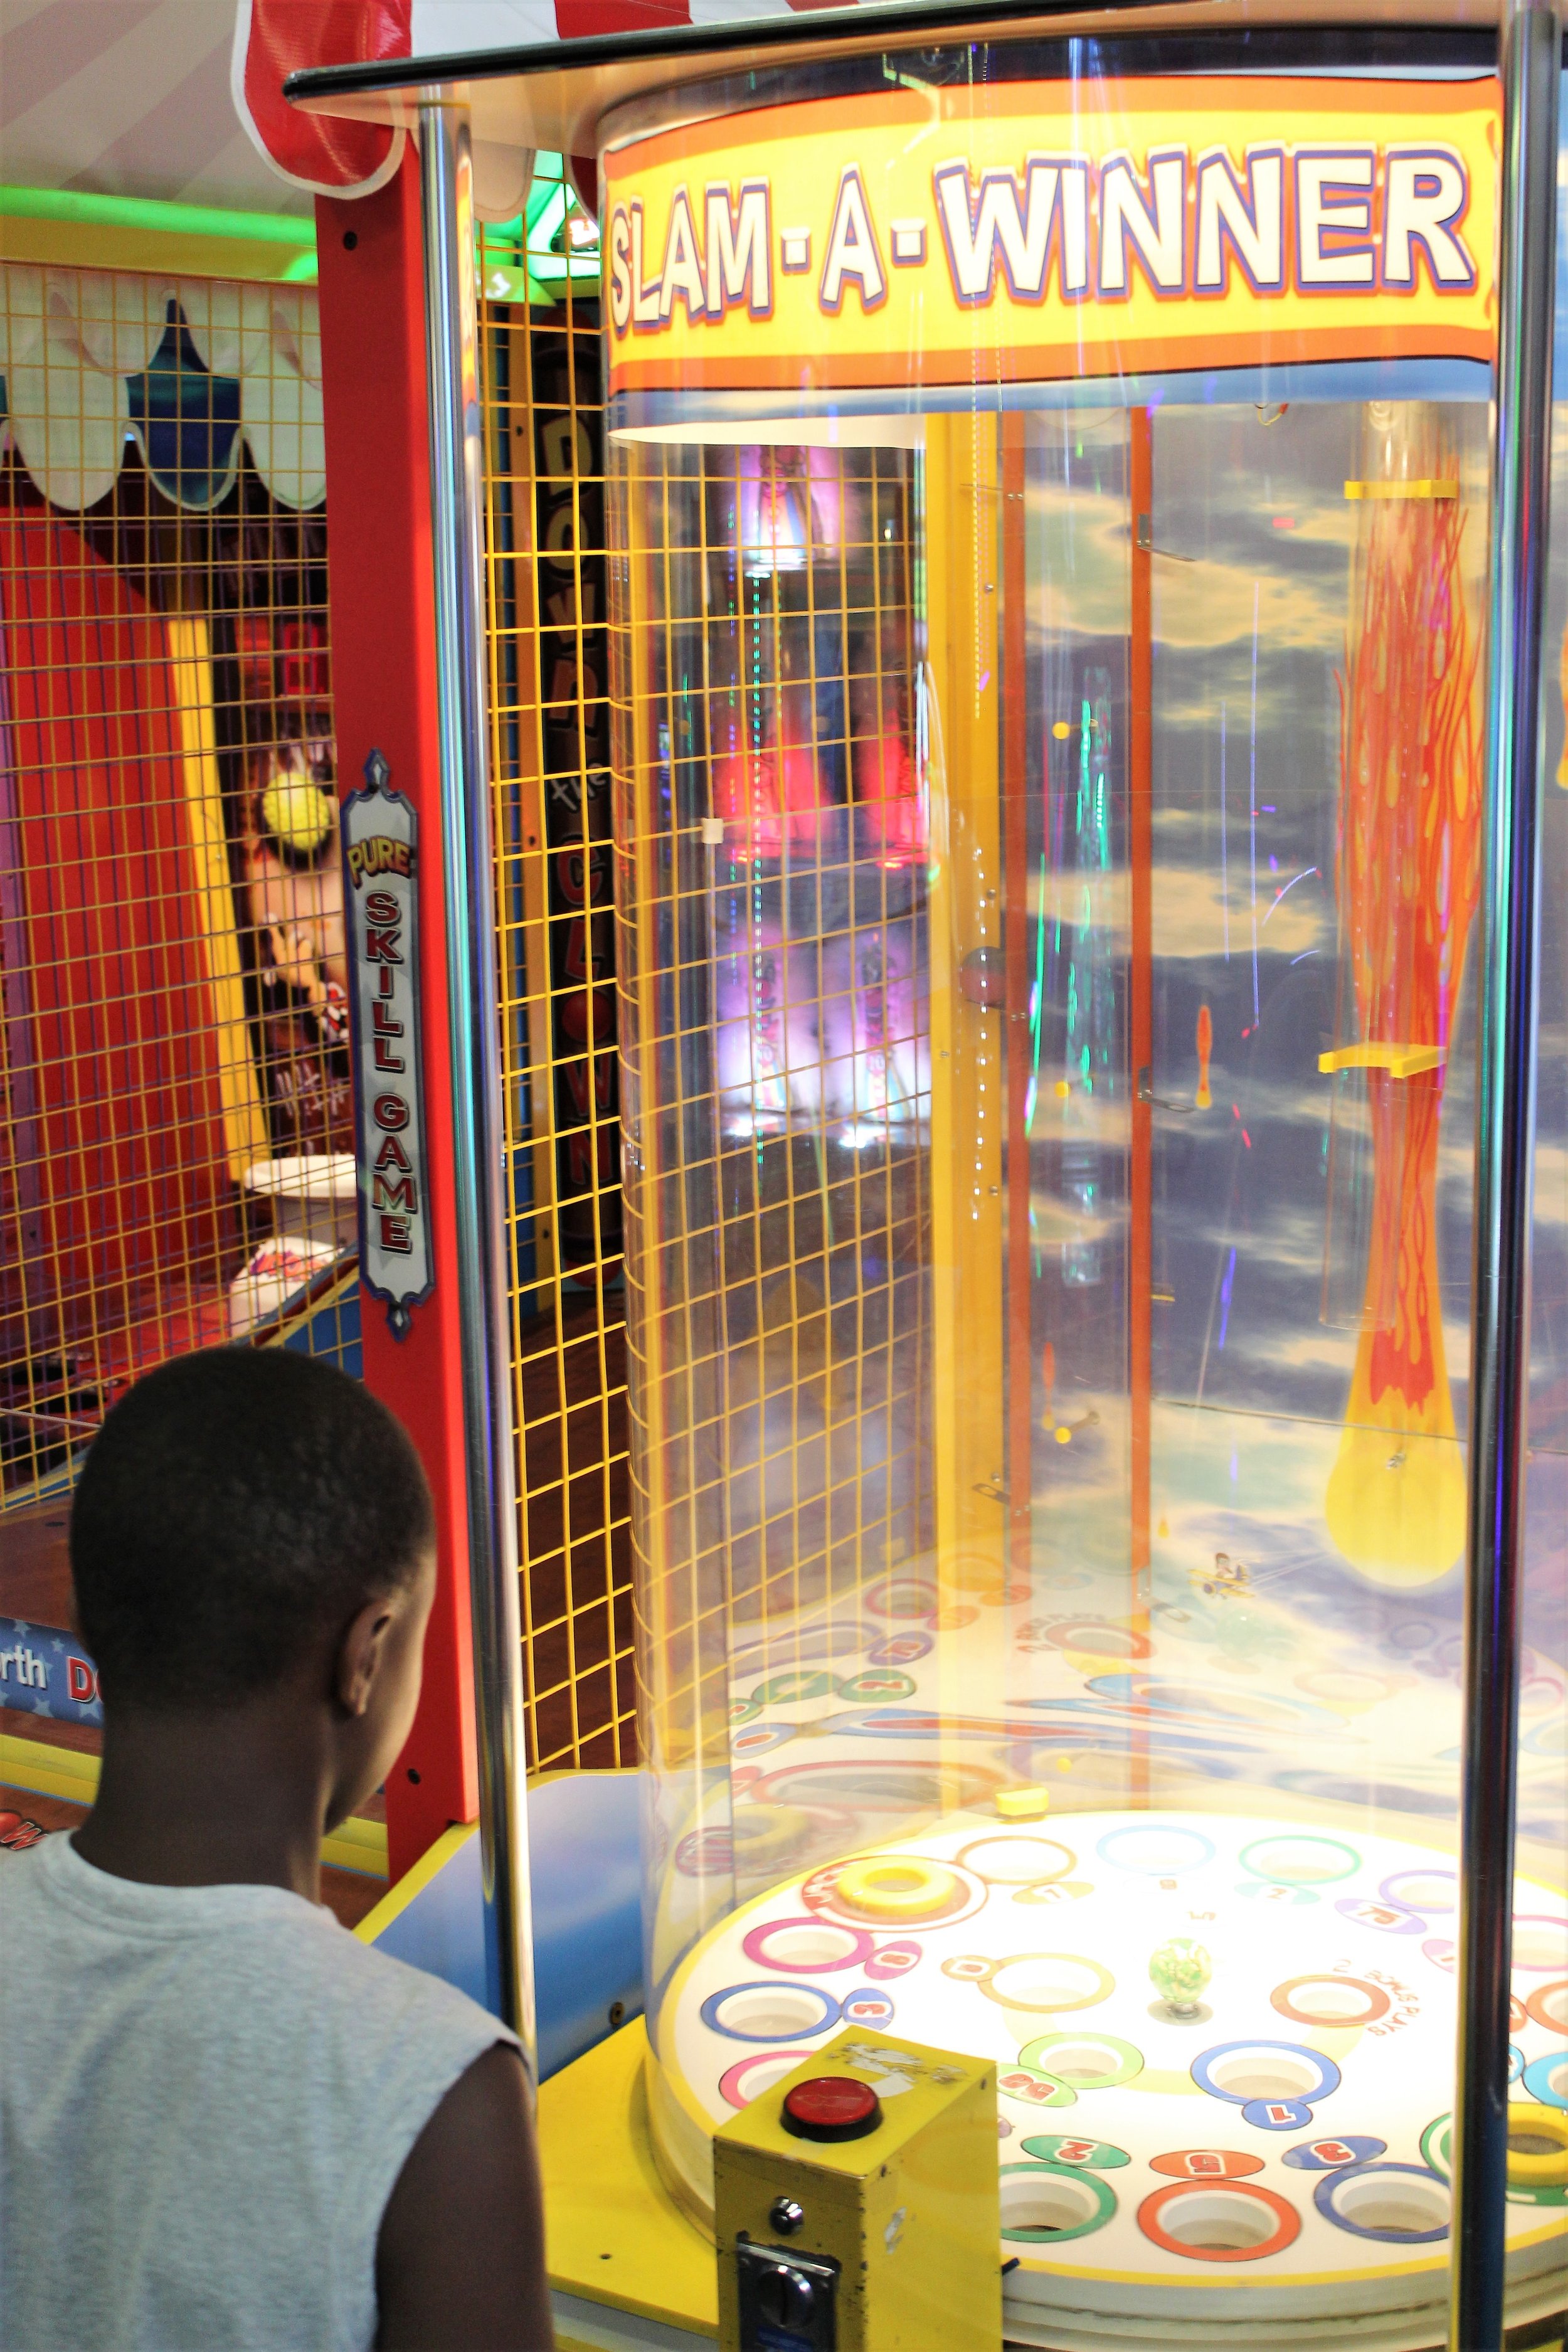  young boy playing slam-a-winner arcade game at classic fun center 